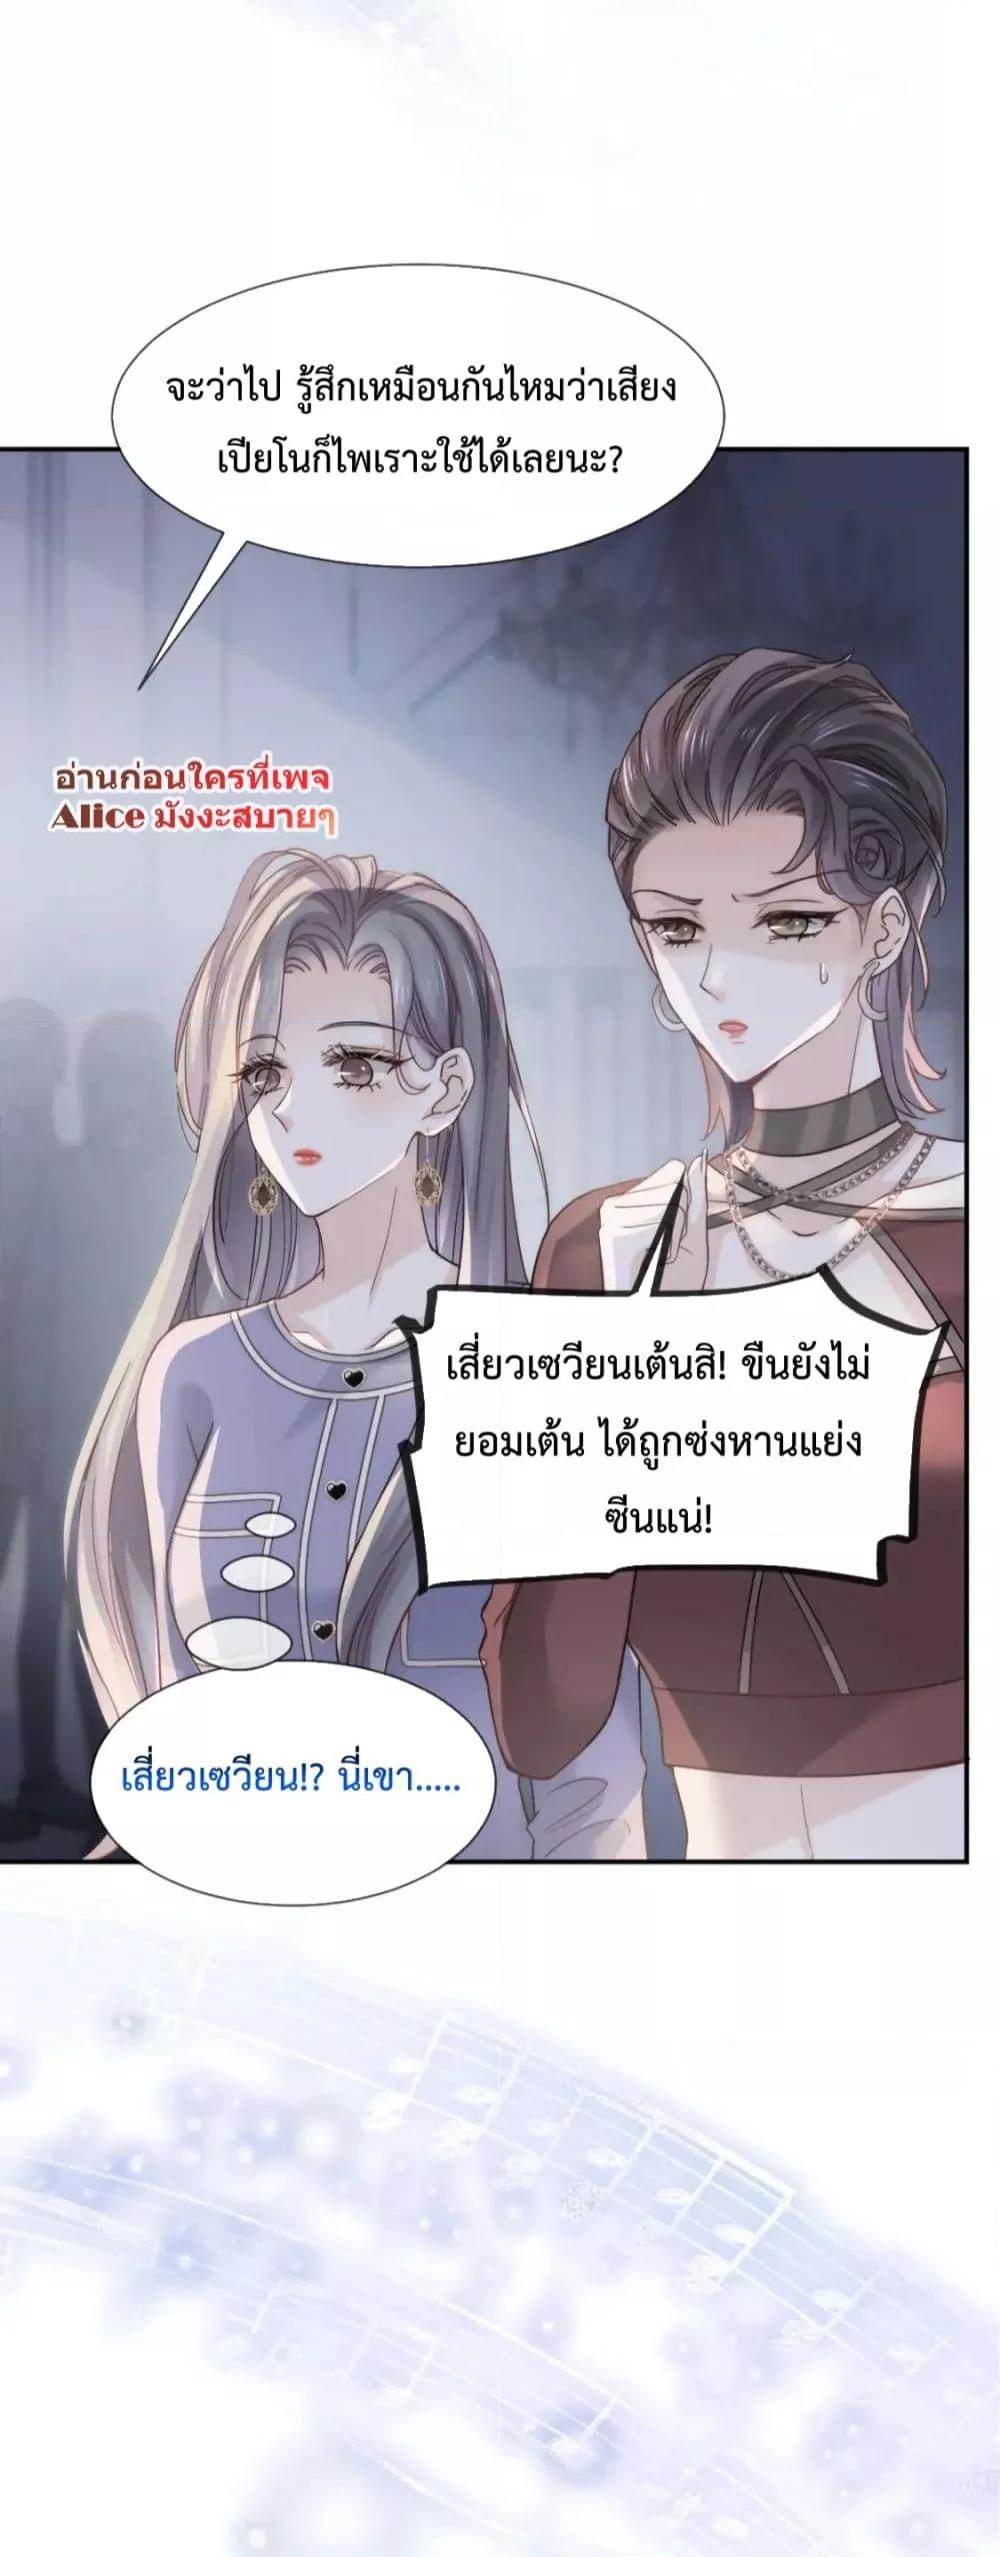 Ding Fleeting Years has planned for me for a long time – ไอดอลสุดตอนที่ 17 (14)